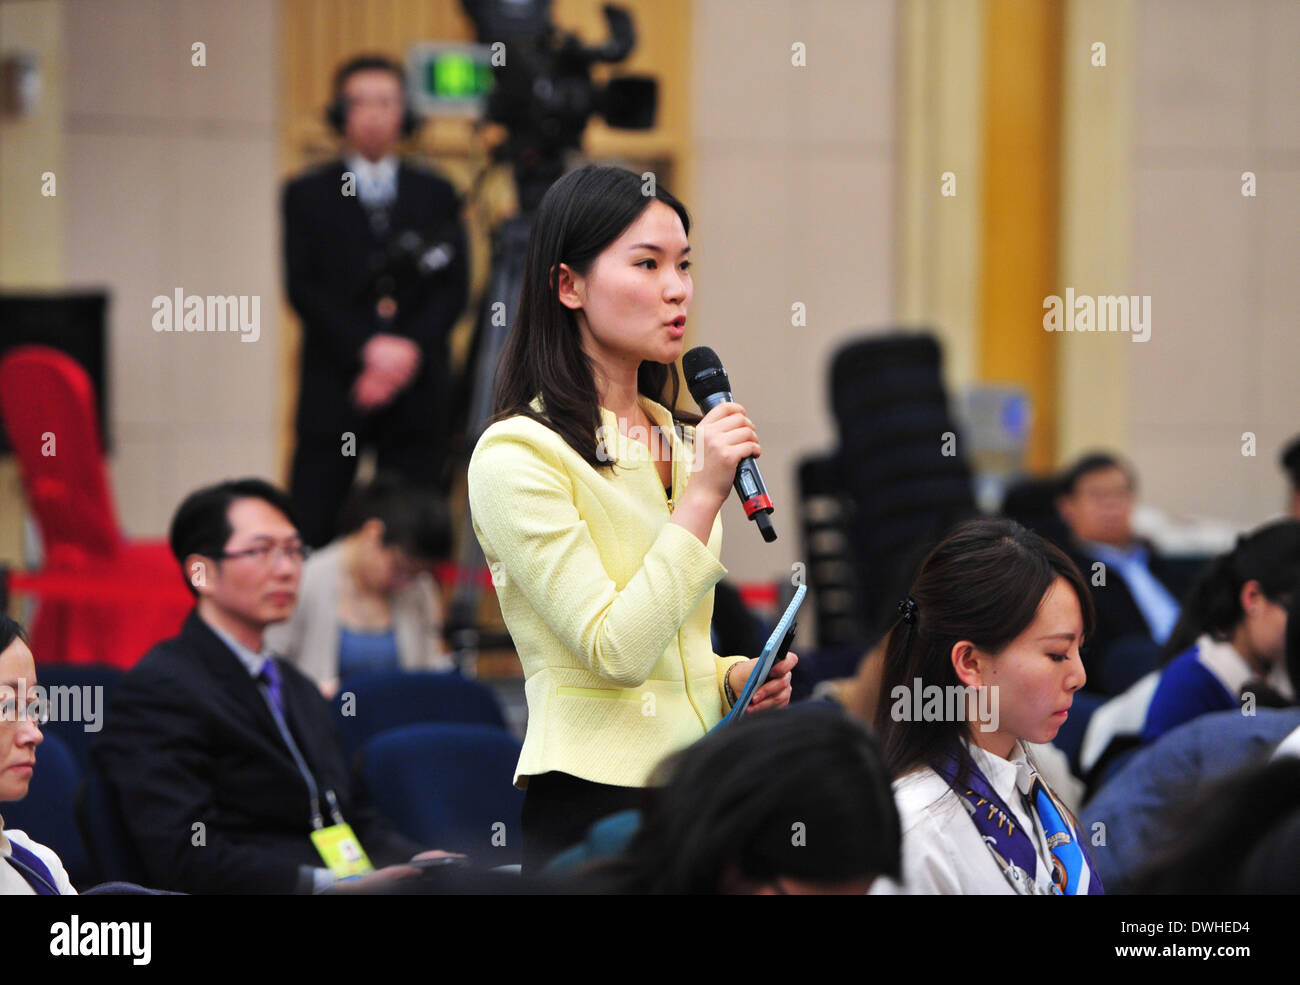 Beijing, China. 9th Mar, 2014. A journalist asks questions at a press conference for the second session of China's 12th National People's Congress (NPC) on legislative and oversight work, in Beijing, capital of China, March 9, 2014. Credit:  Xiao Yijiu/Xinhua/Alamy Live News Stock Photo